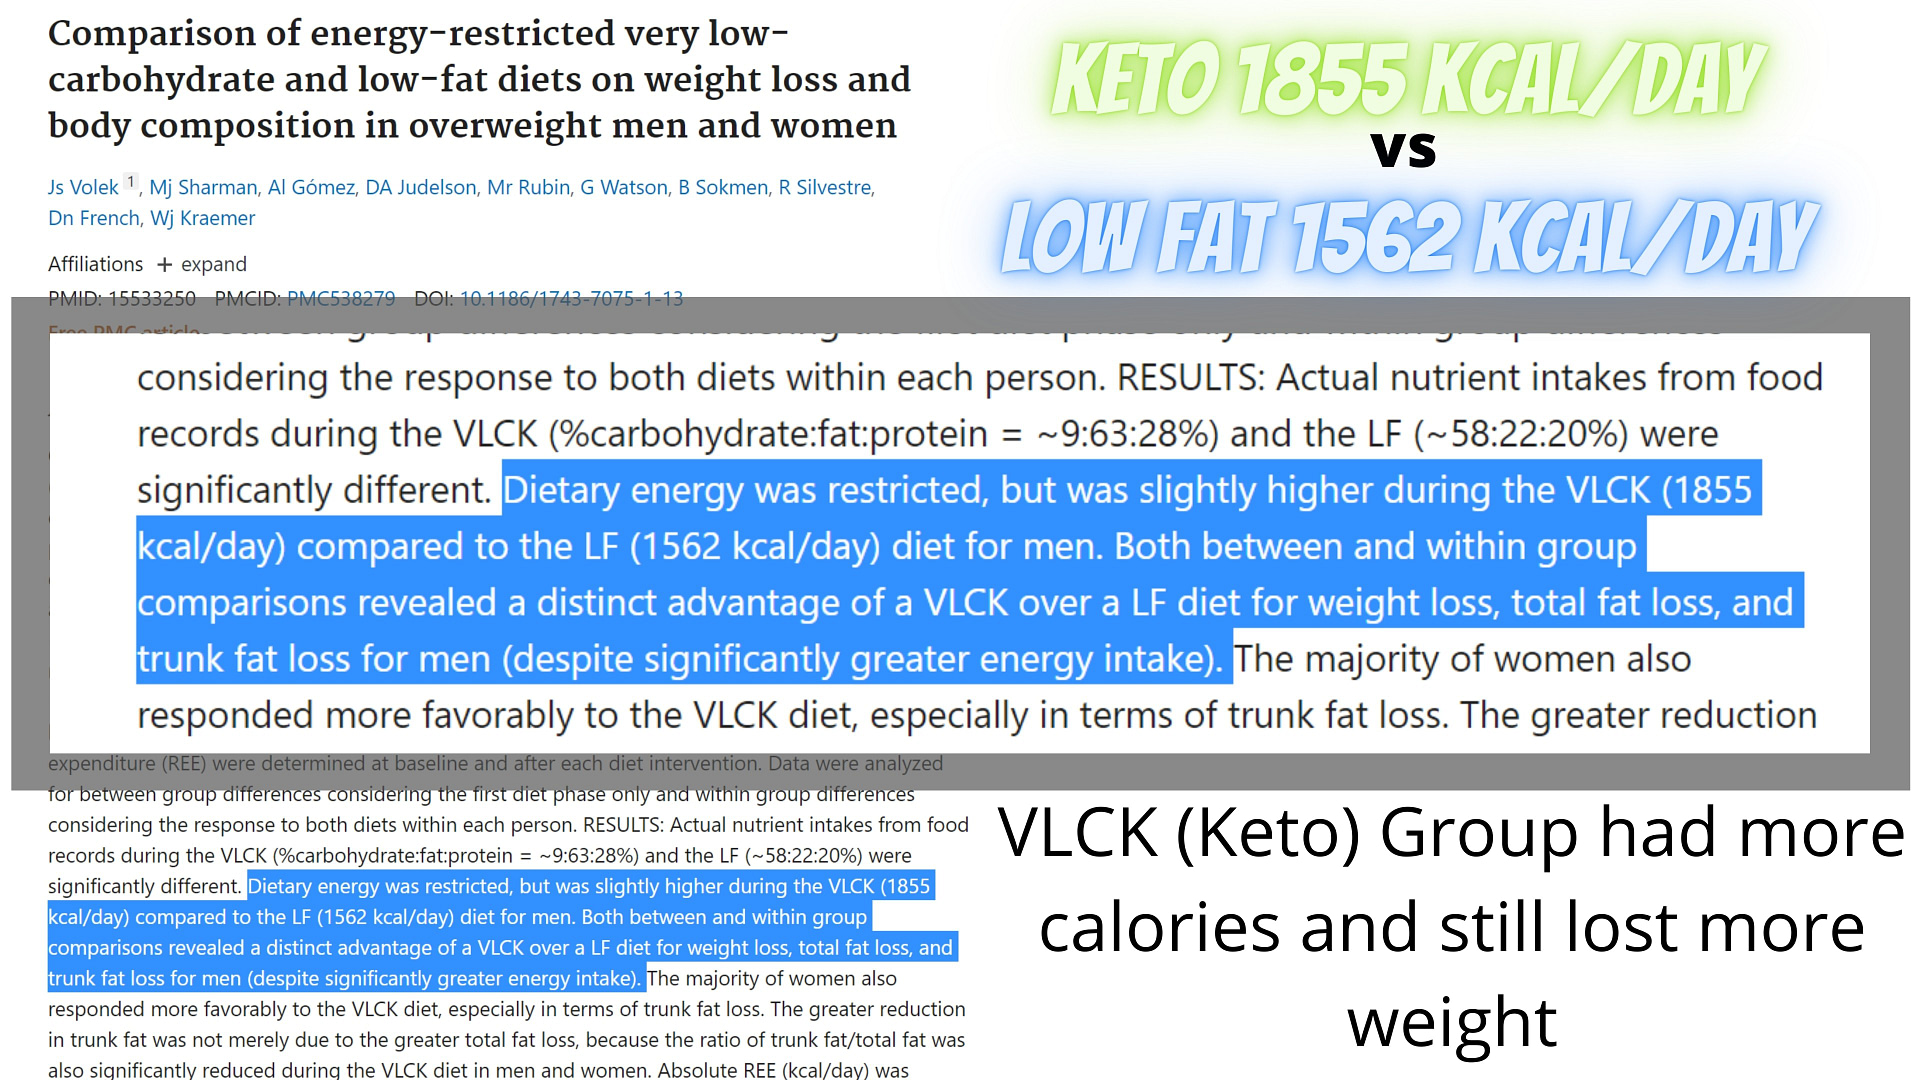 Studies show, even with a higher number of calories, people following a keto diet lose more weight than people following a low-fat diet.